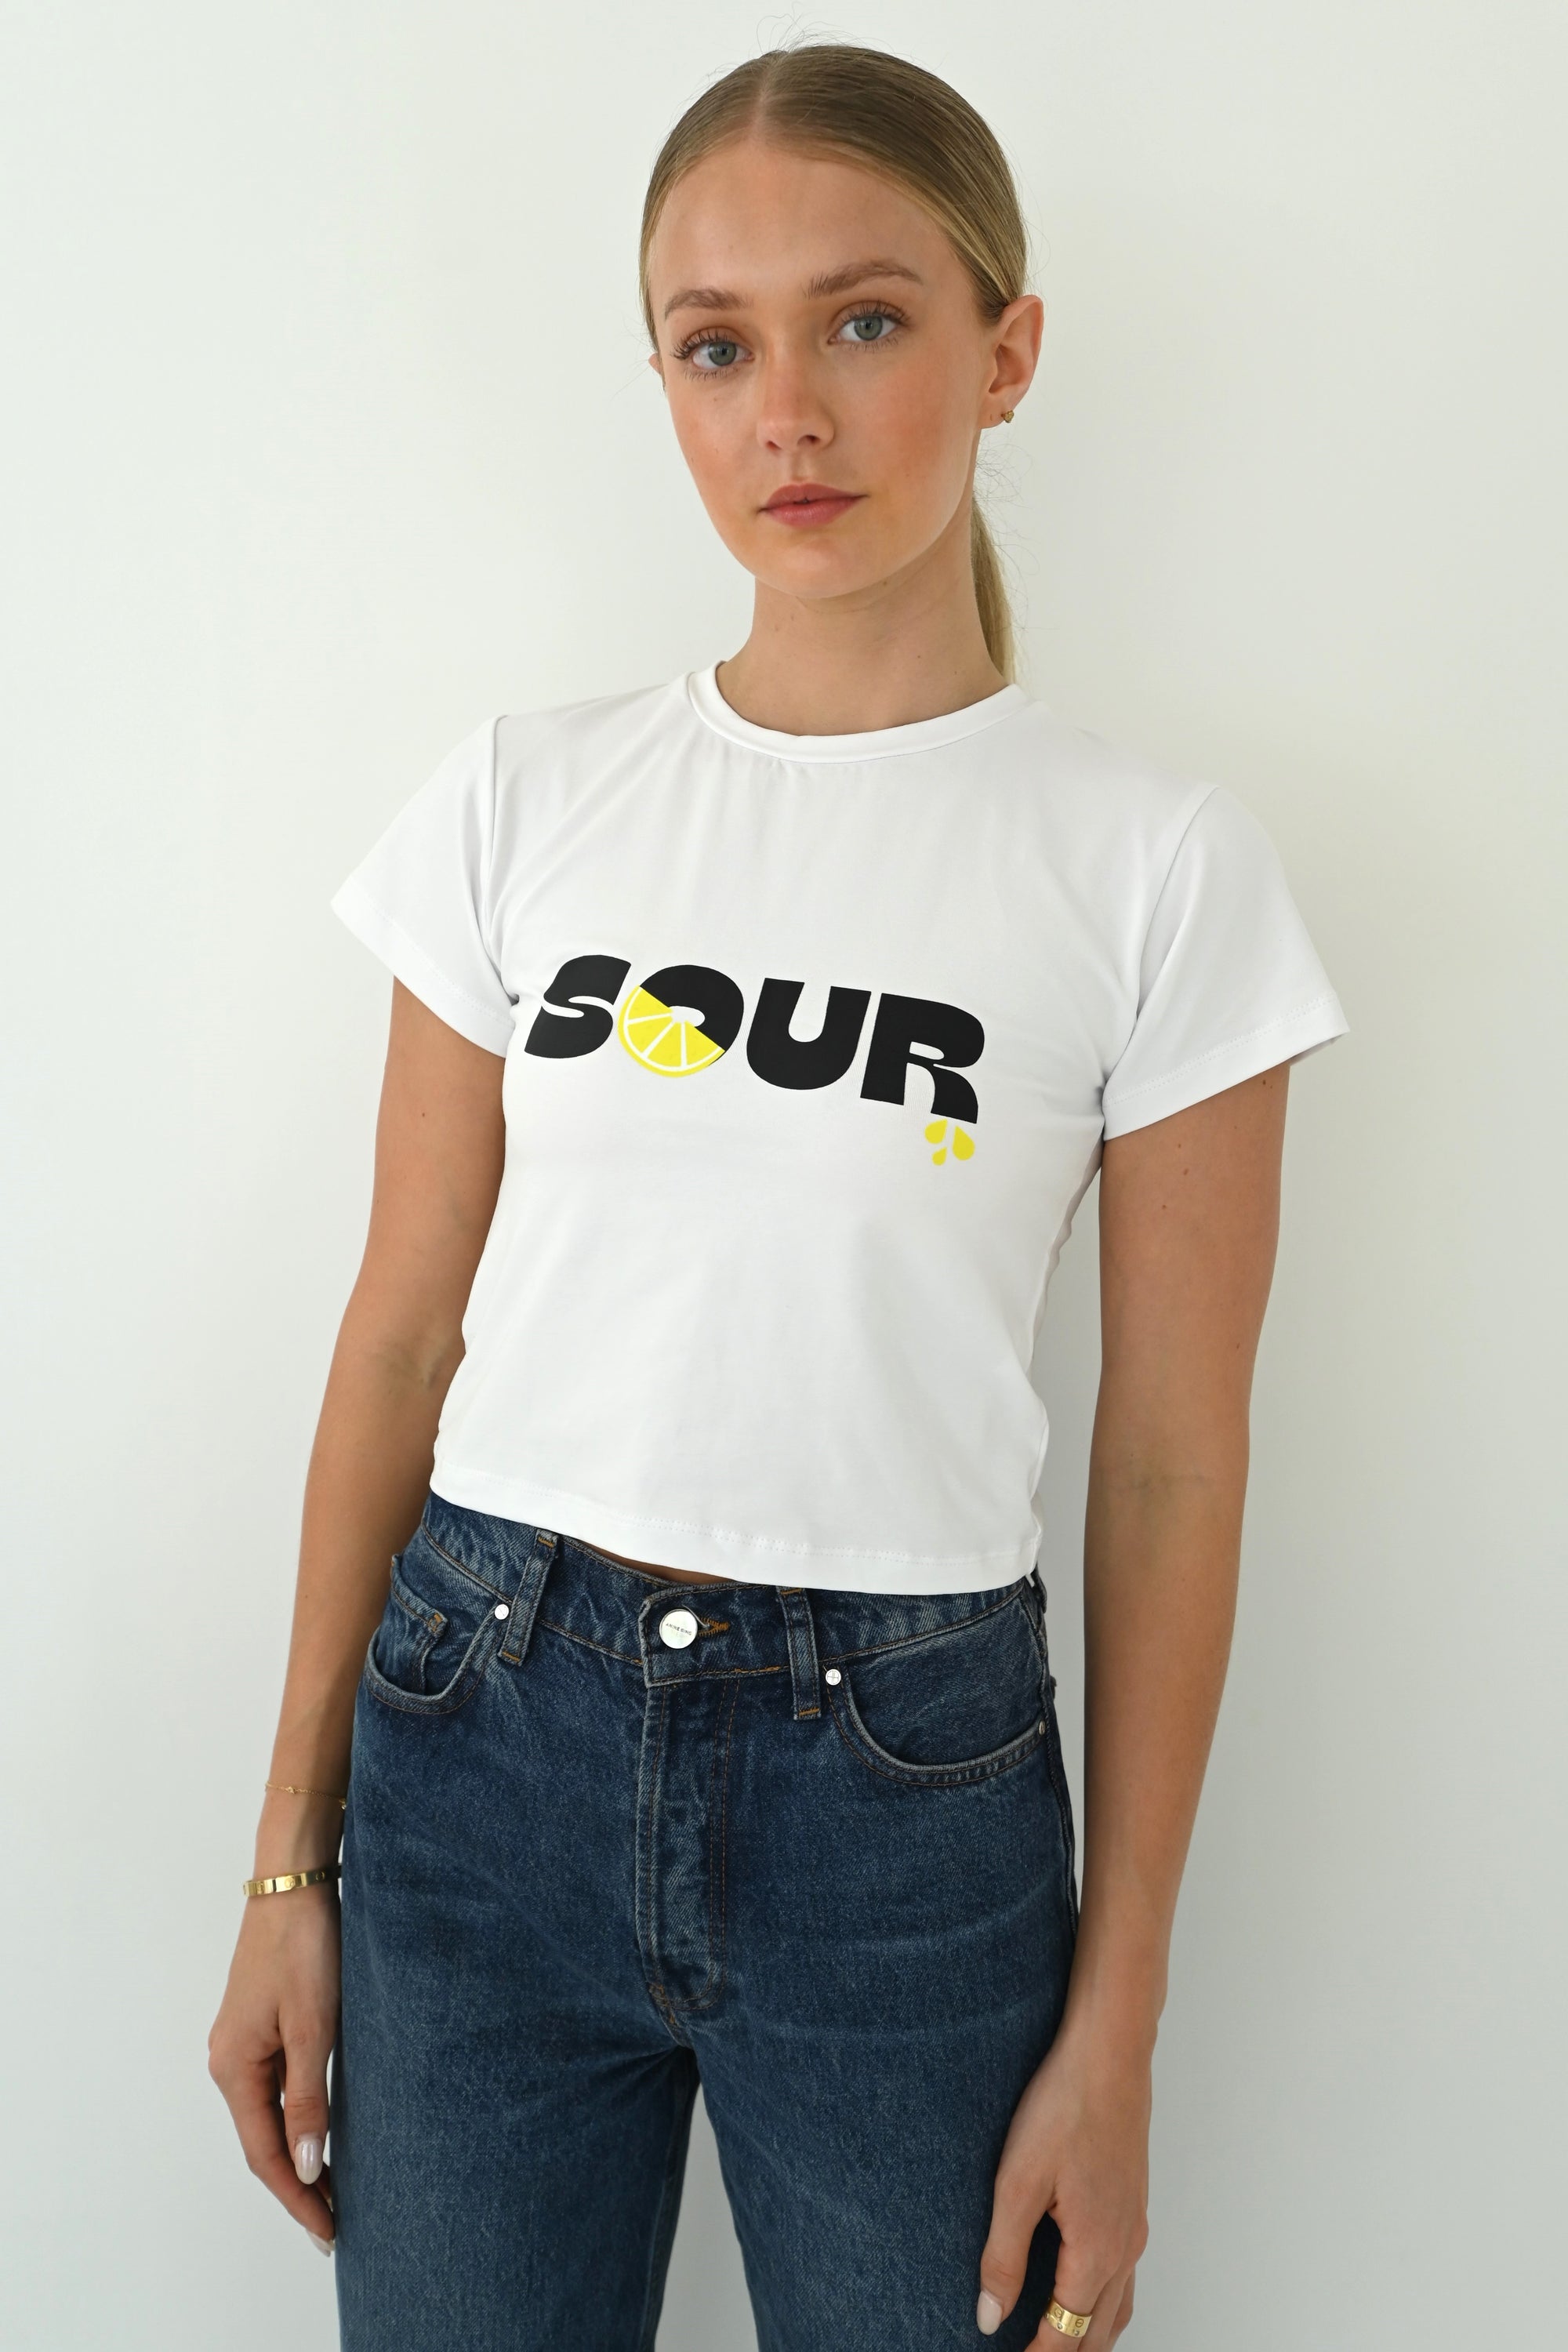 SOUR Baby Tee